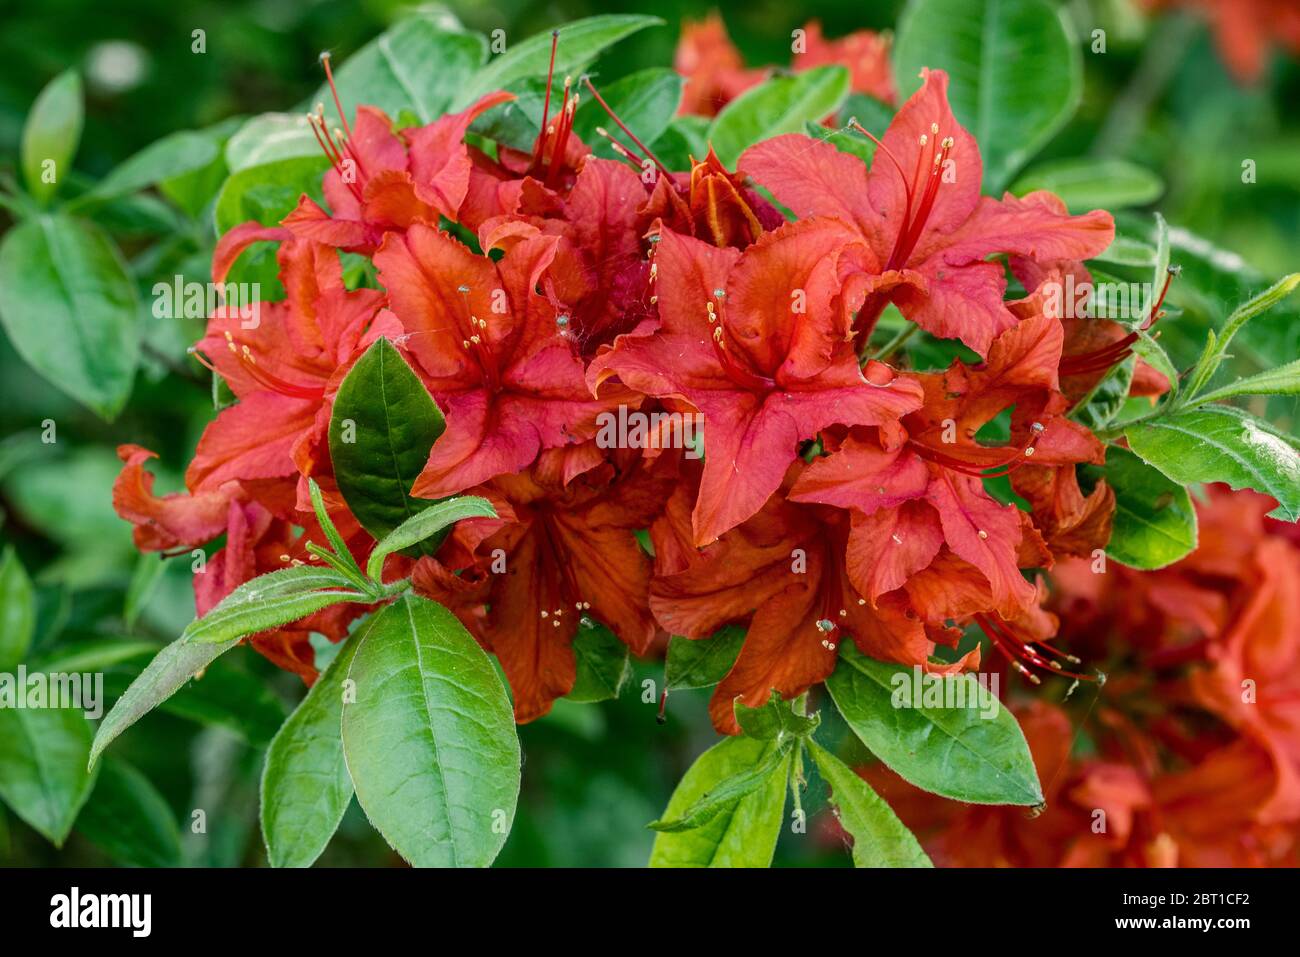 Azalea Royal Command / Royal Command Rhododendron, close up showing red flowers and leaves in spring Stock Photo